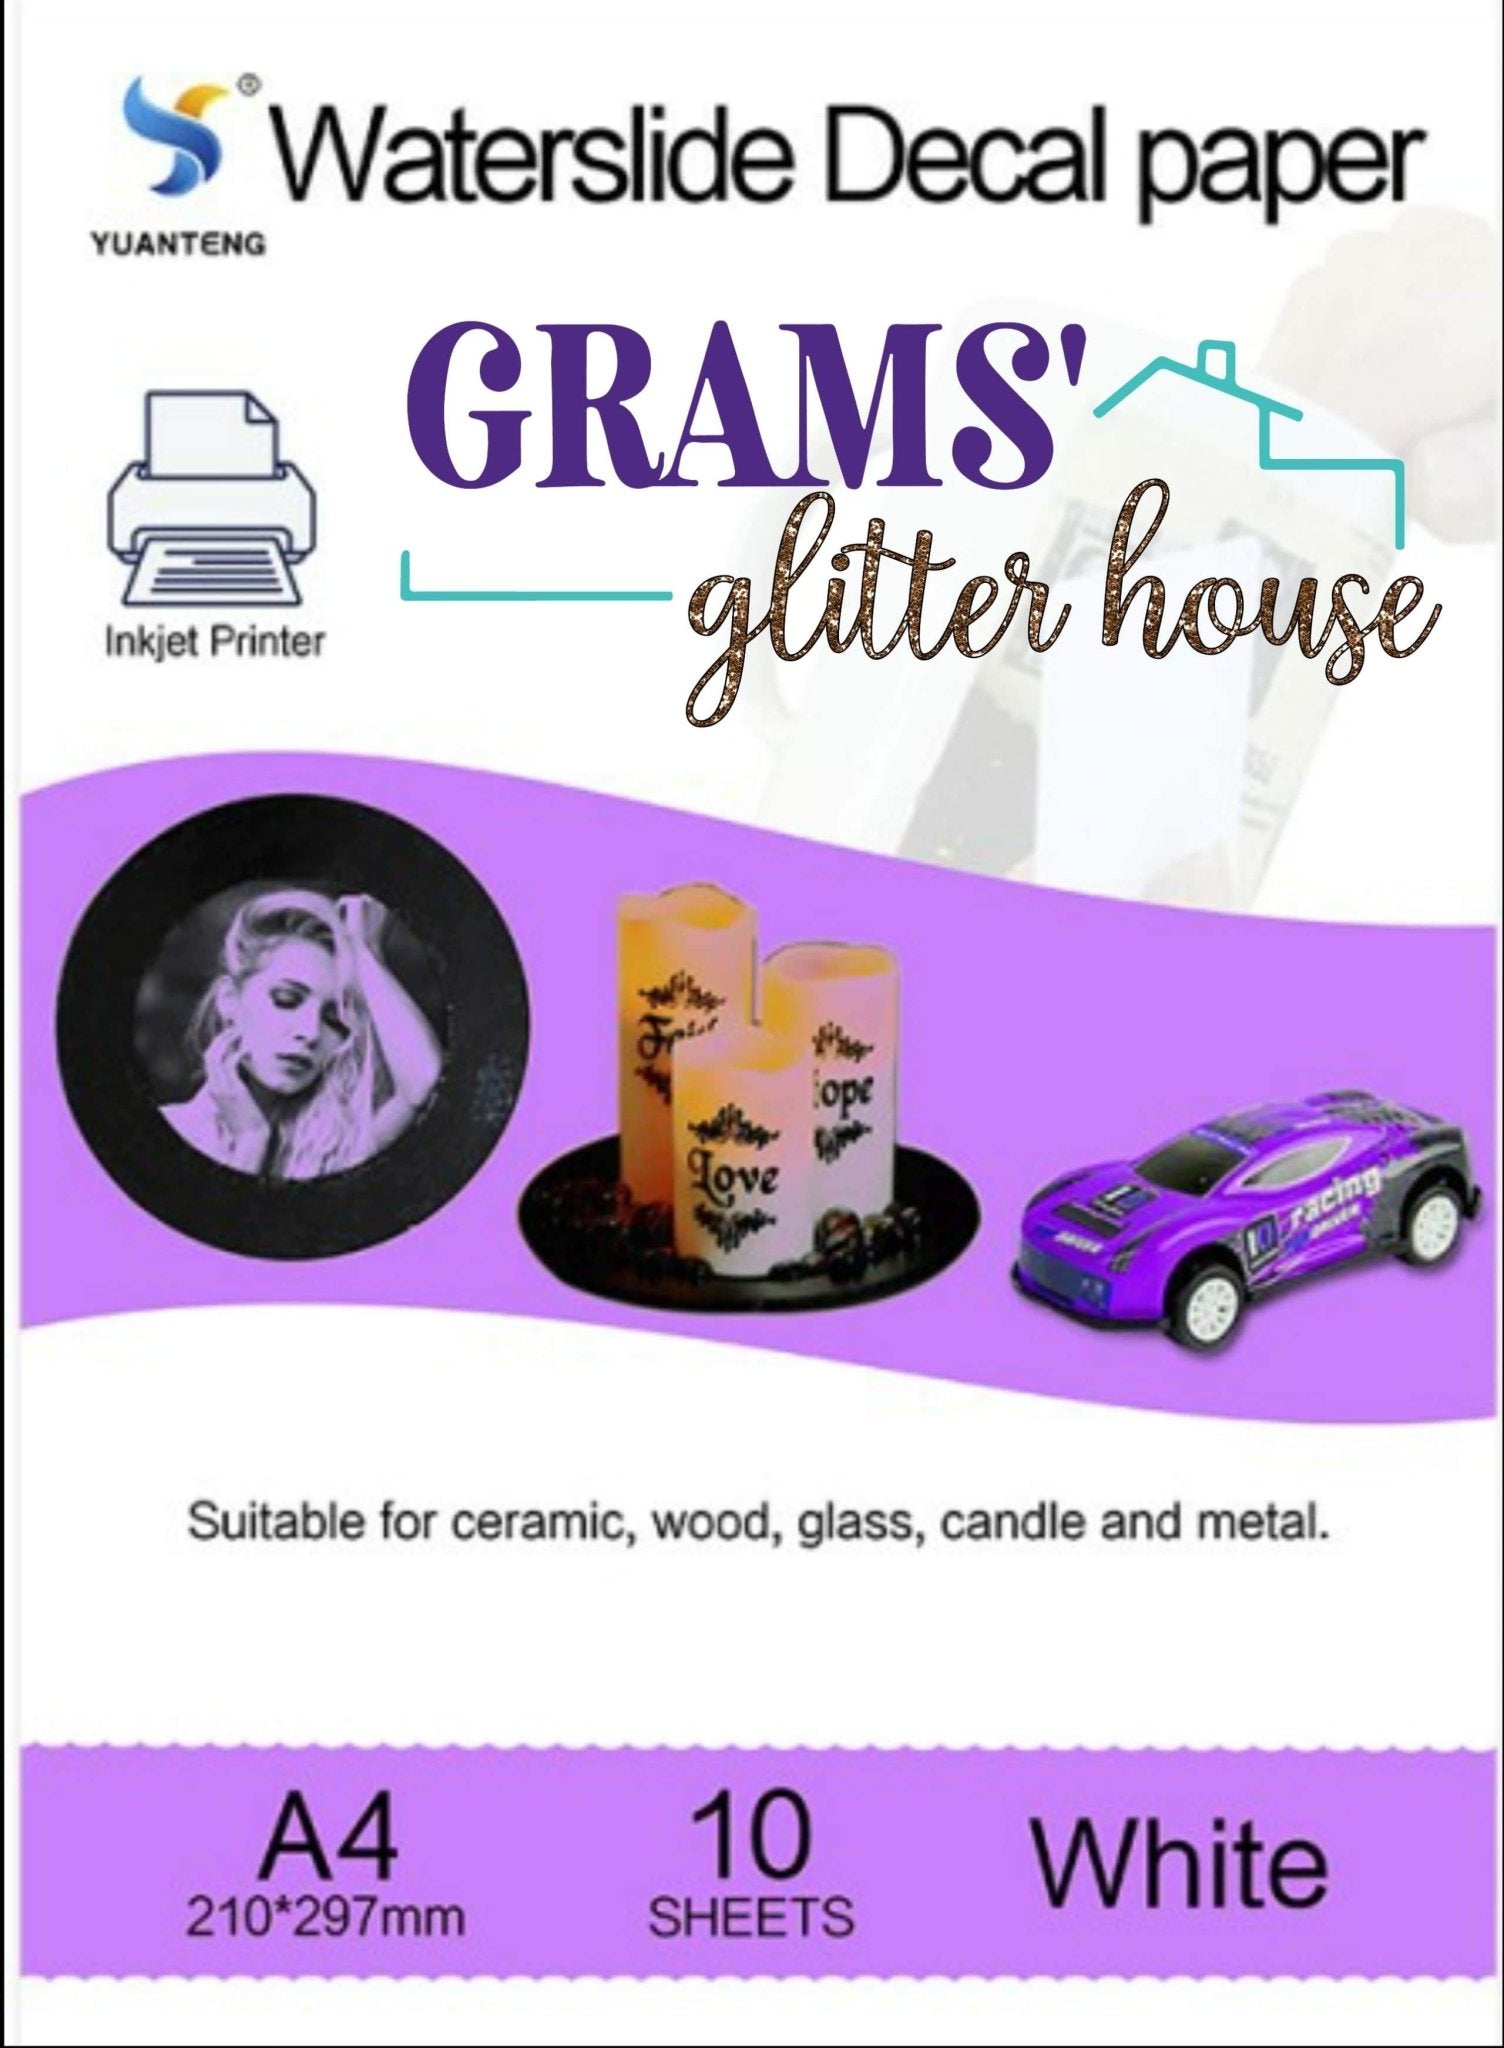 White Grams' Glitter House Ink Jet Printer WHITE Waterslide Decal Paper Supplies